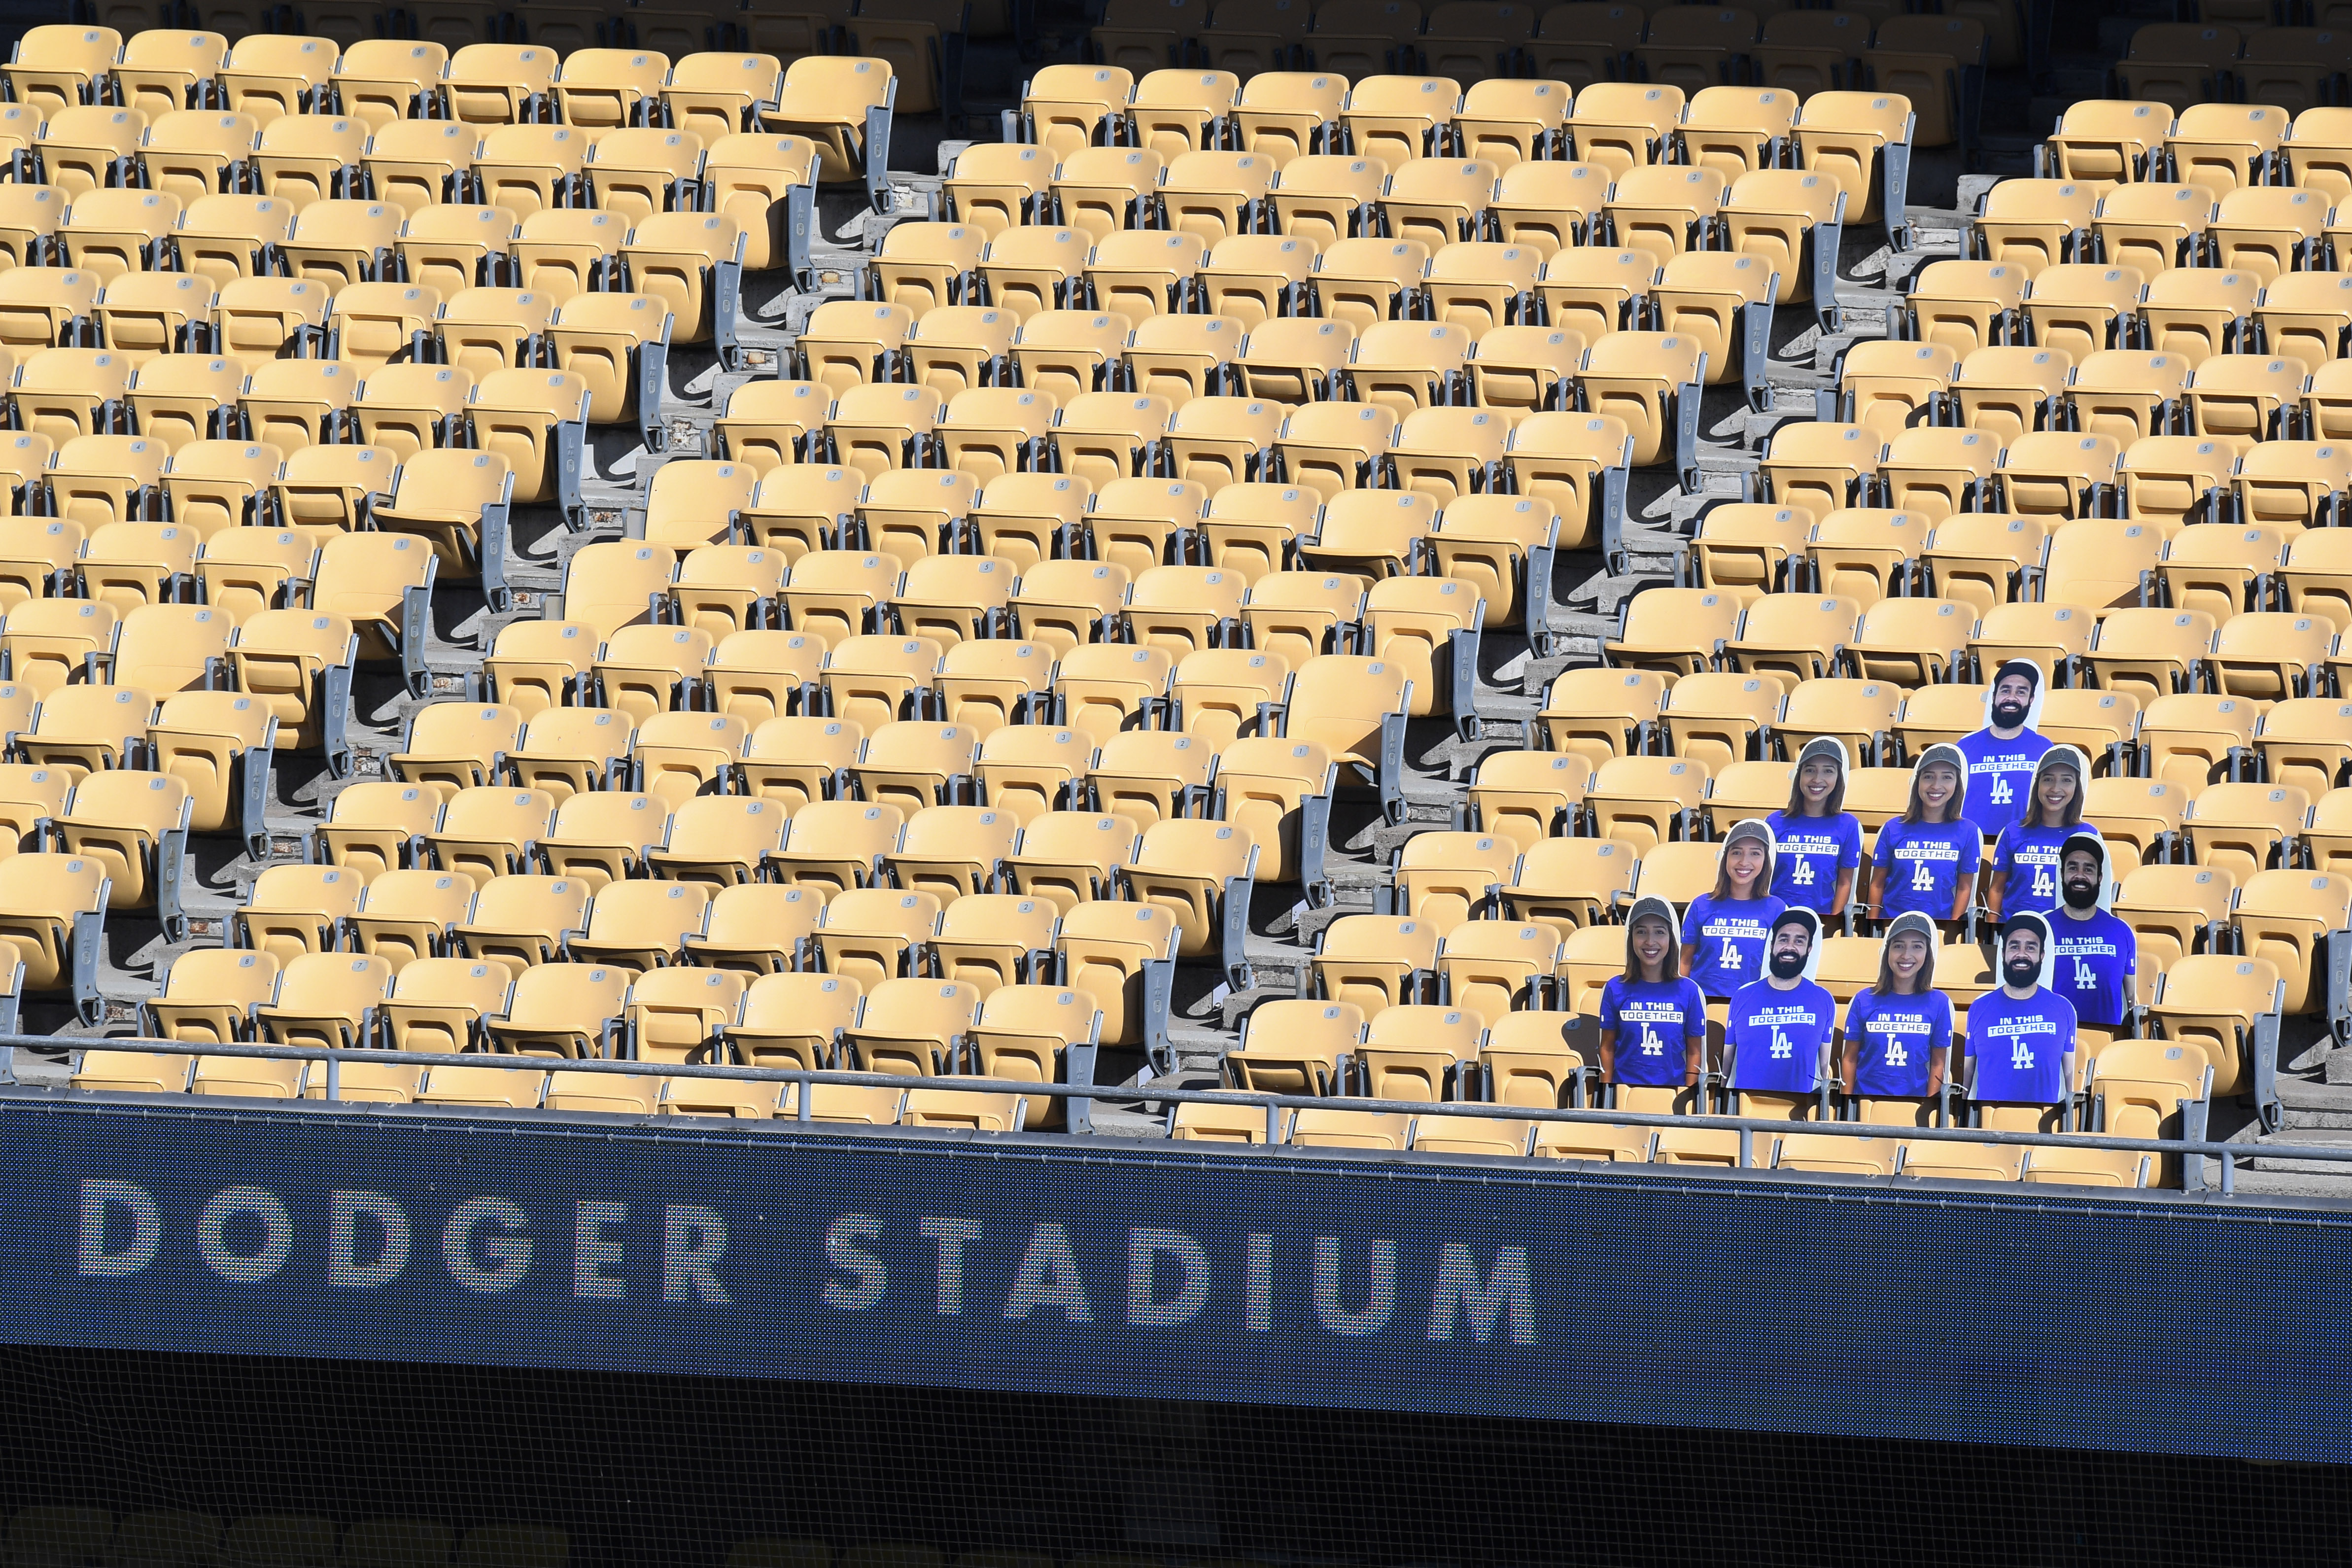 Photos: Pinch-Sitters Take Their Seats at Dodger Stadium – NBC Los Angeles